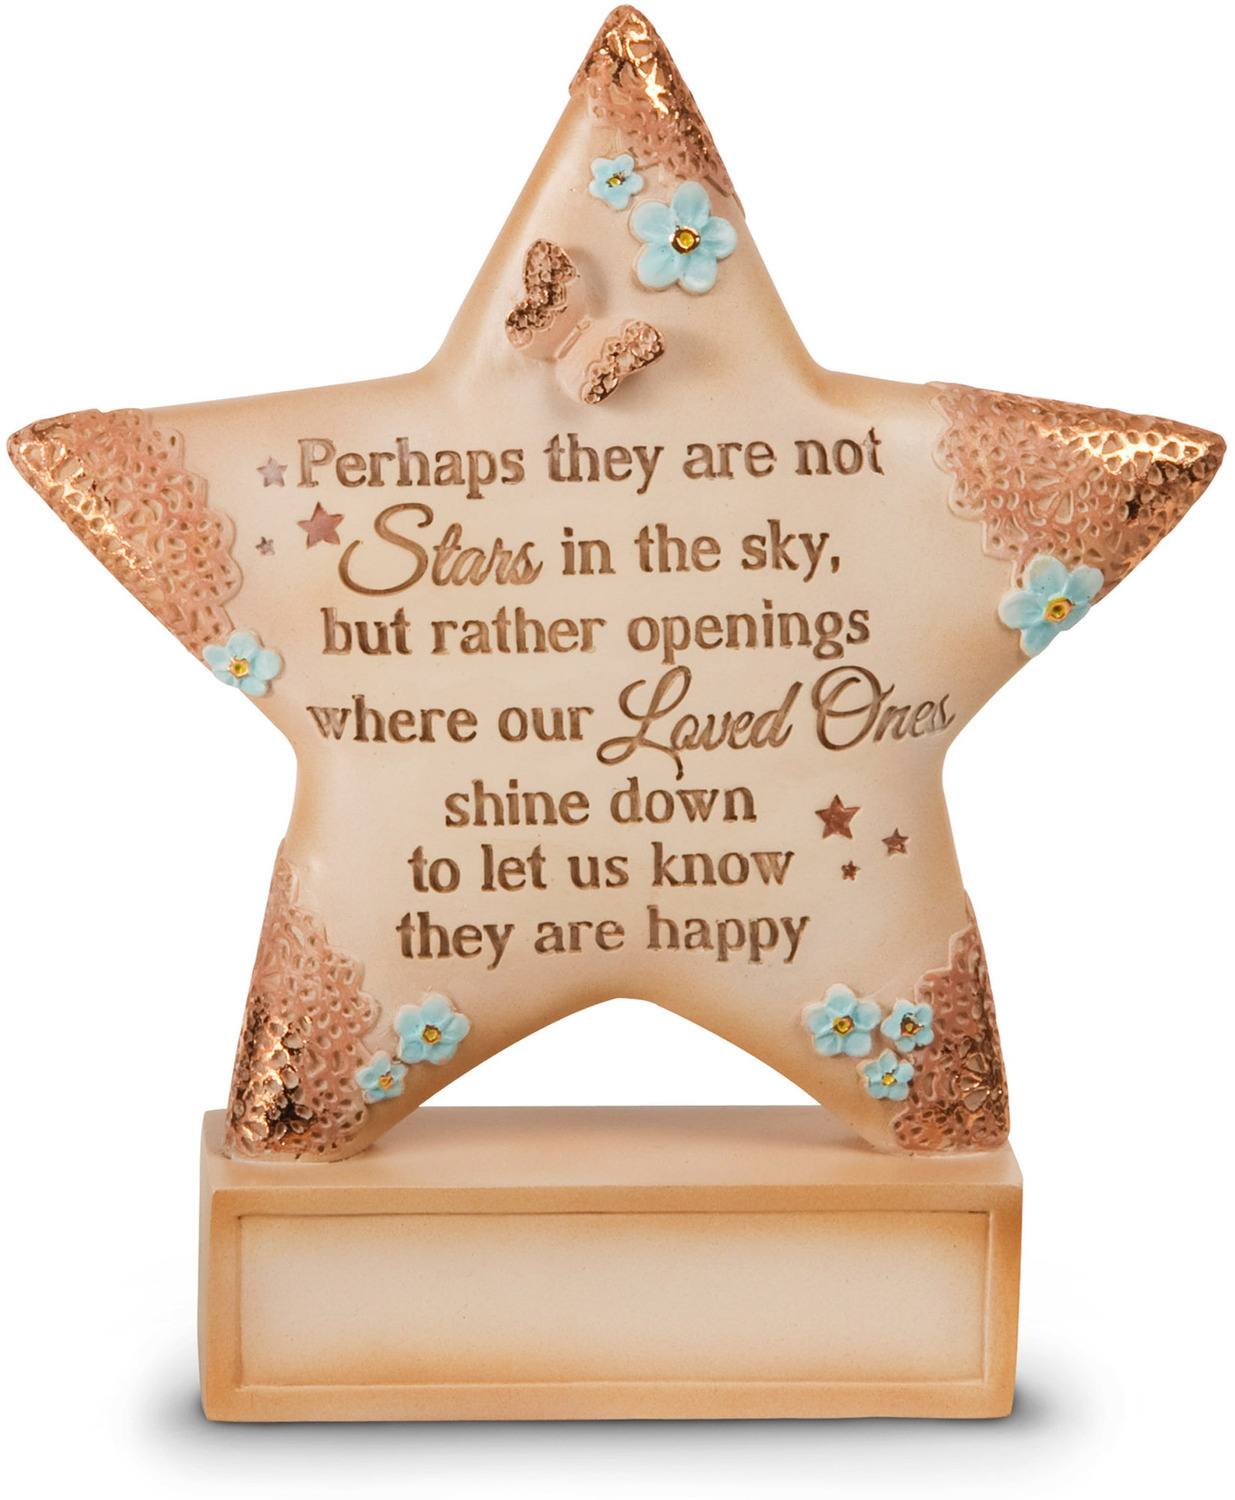 Stars in the Sky by Light Your Way Memorial - Stars in the Sky - 4" x 4.5" Self-Standing Star Plaque